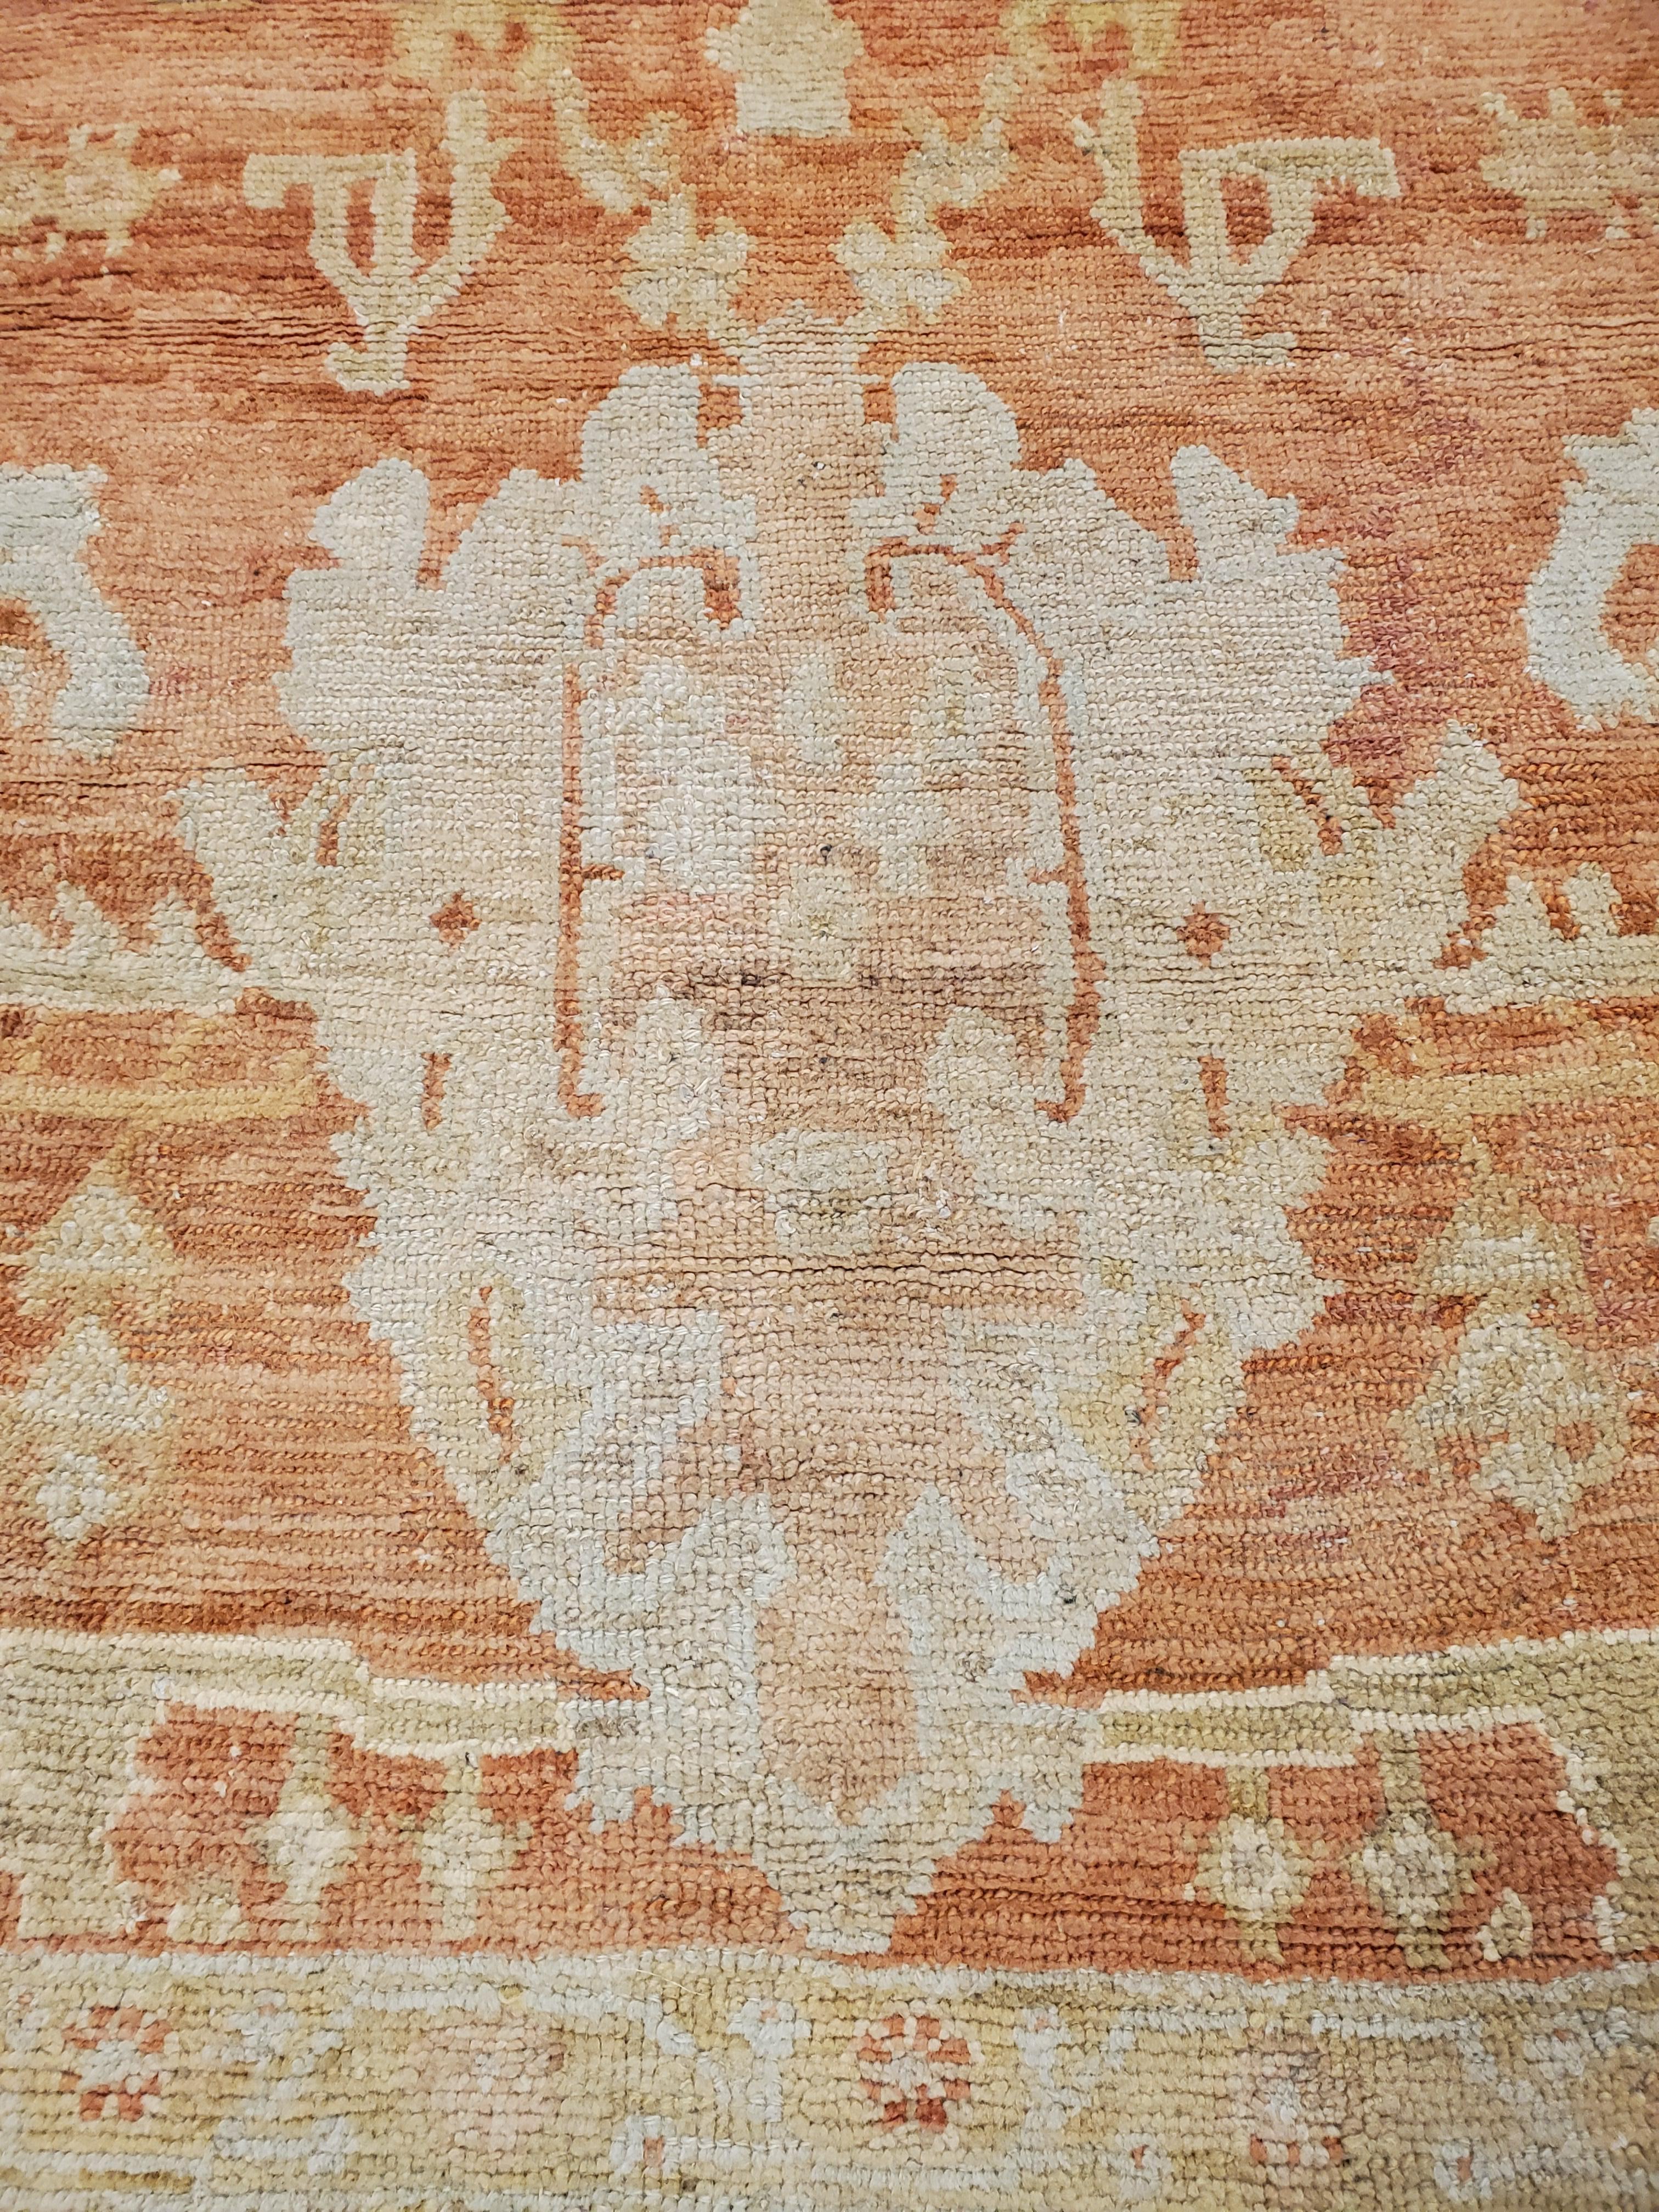 Antique Oushak Carpet, Handmade Oriental Rug, Coral Field, Gold, Ivory Border In Excellent Condition For Sale In Port Washington, NY